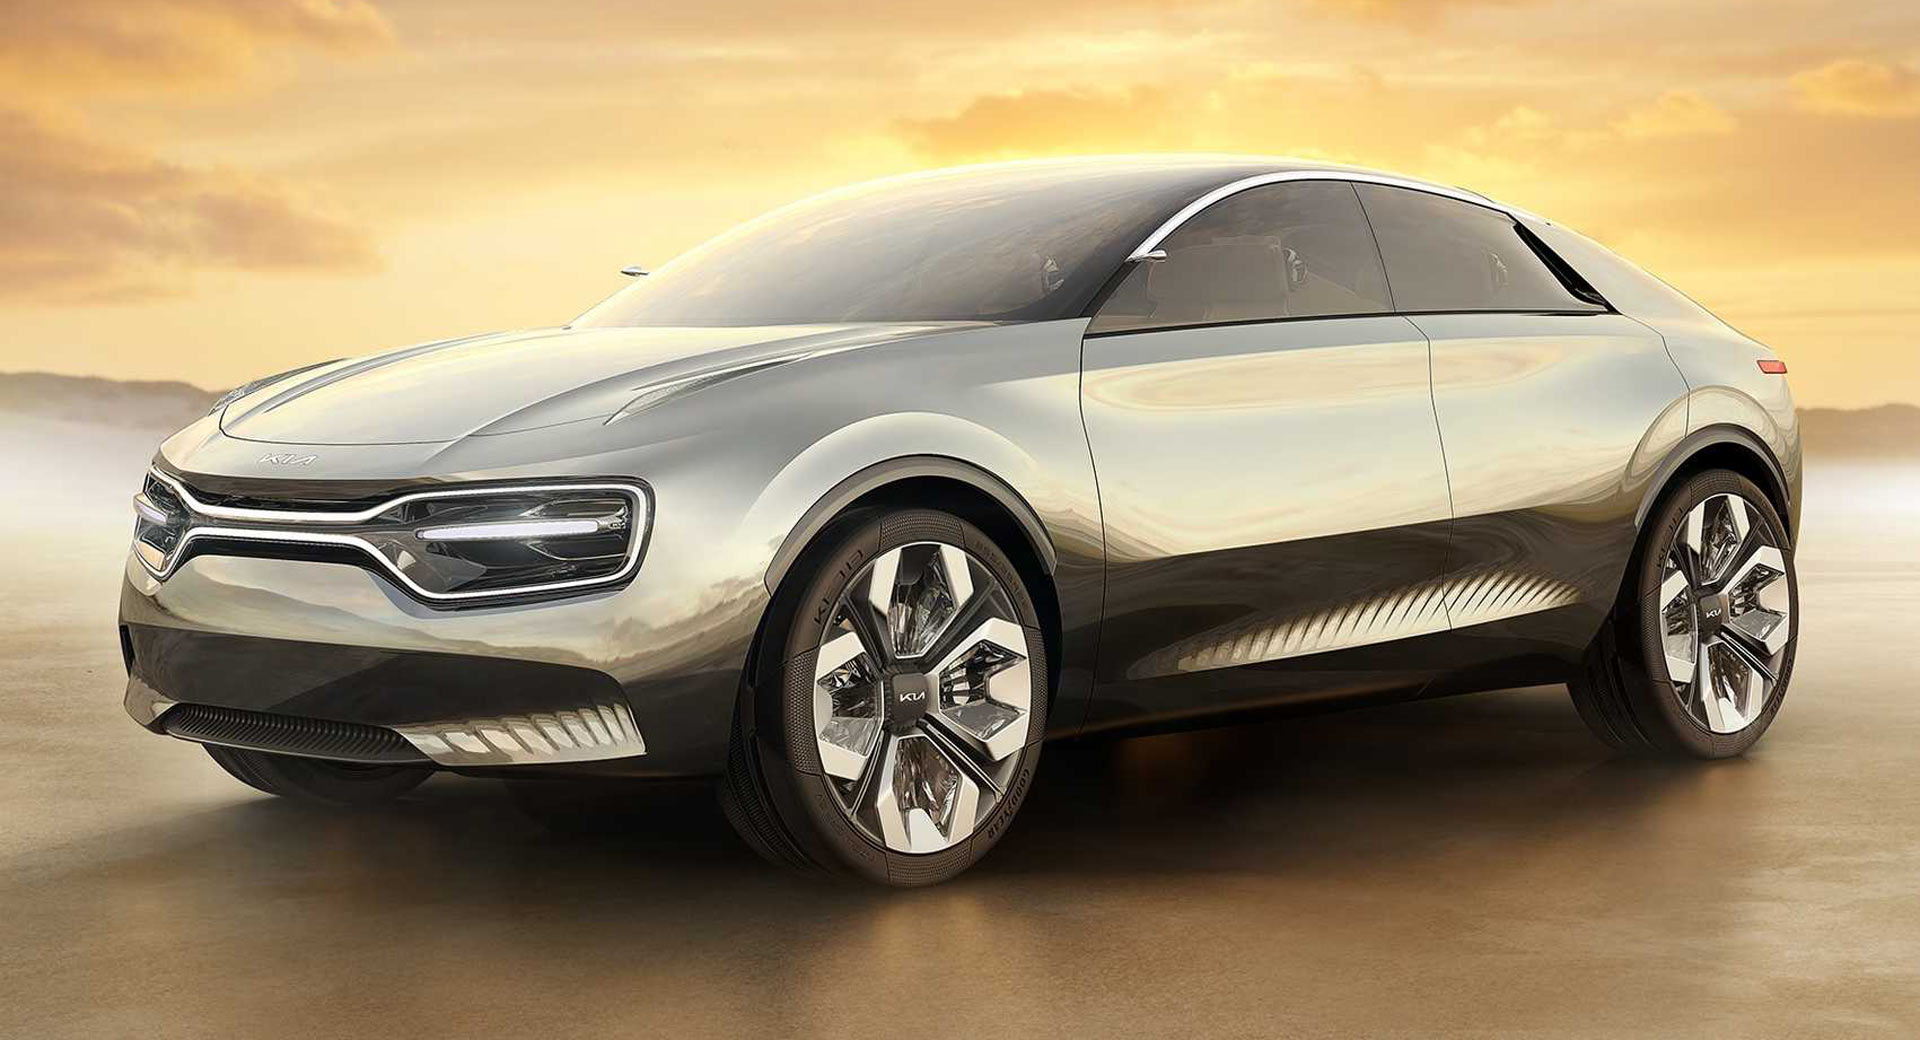 Imagine By Kia Is An EV Concept That's Meant To Transcend Segments